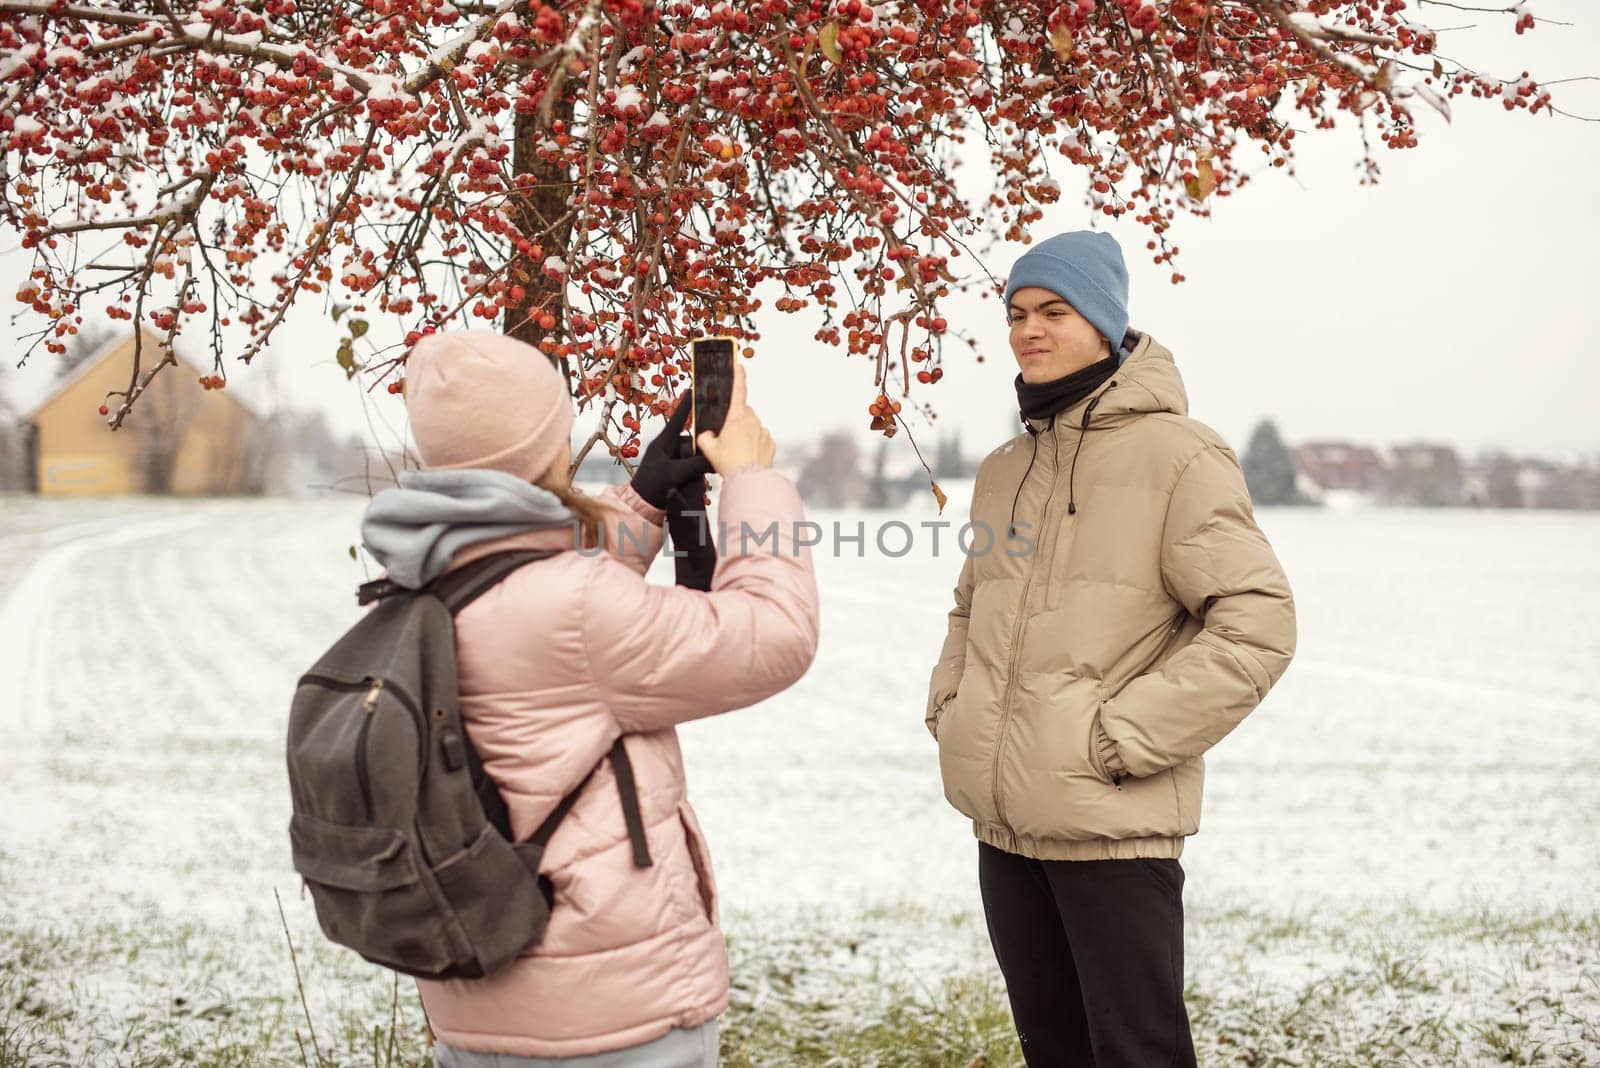 Winter Romance: Girl in Pink Winter Jacket Photographing Boy Against Snow-Covered Red Tree and Field. Embrace the winter magic in this enchanting image, where a girl in a pink winter jacket captures a moment as she photographs her companion against the backdrop of a snow-covered red tree and field. The photograph beautifully conveys the essence of winter romance and the serene beauty of a snowy landscape.